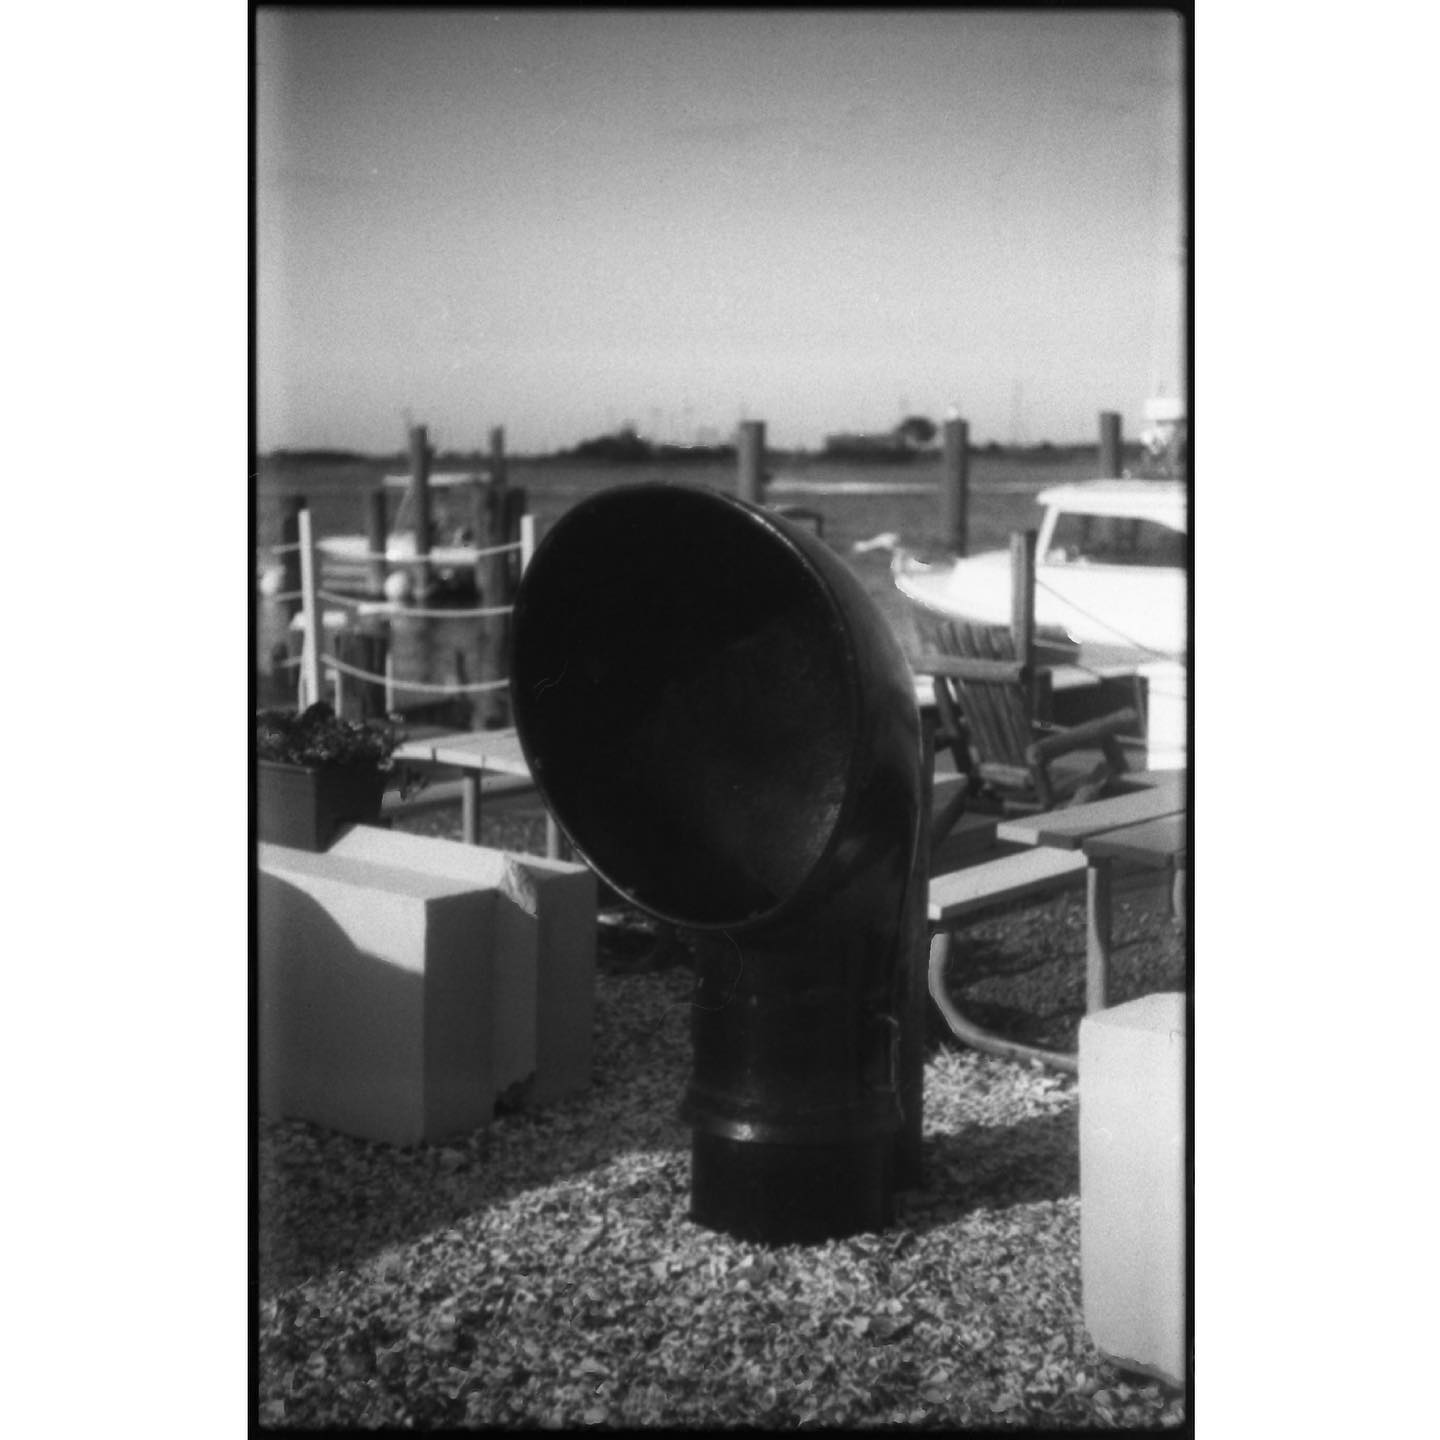 Horn

I have no idea what this is used for. Itâs outside Bahrâs Seafood Restaurant in Highlands, NJ.

Another shot from my #contaxiiia on Eastman No. 10 shot at EI 0.3, expired in March, 1931. #fossilizedfilm #film #filmphotography #allthroughalenspodcast